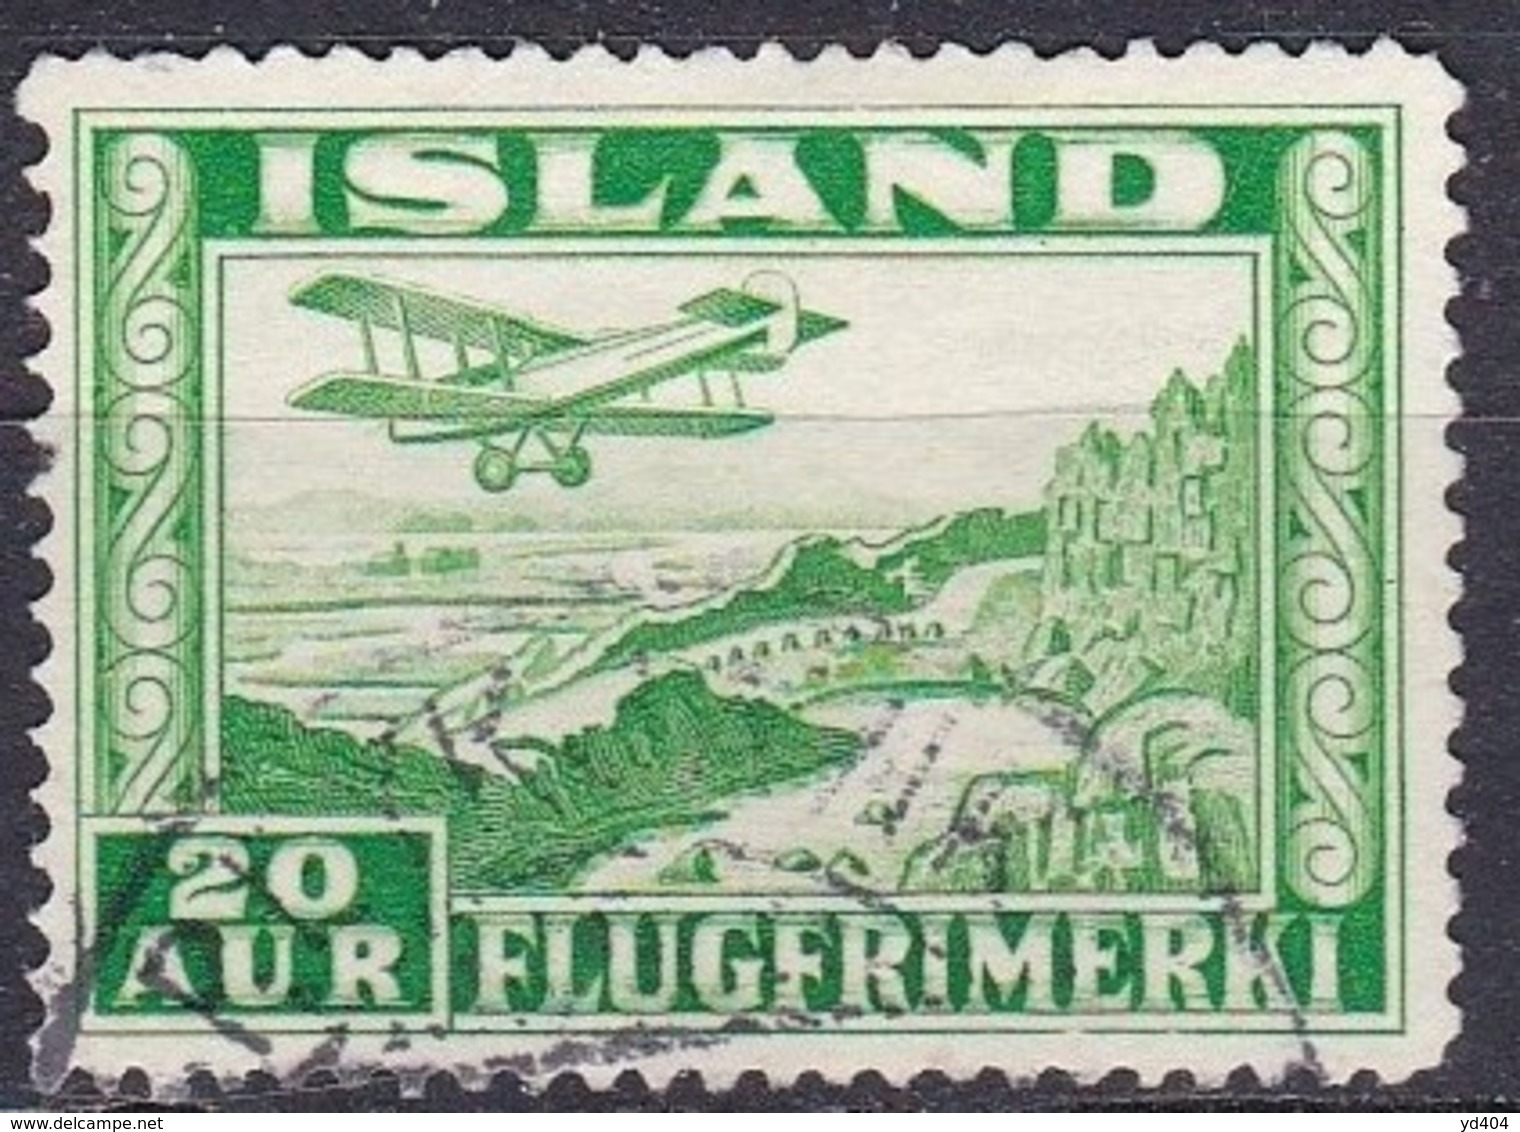 IS324 – ISLANDE – ICELAND – 1934 – PLANE OVER THINGVALLA – SC # C16a USED 19 € - Luchtpost